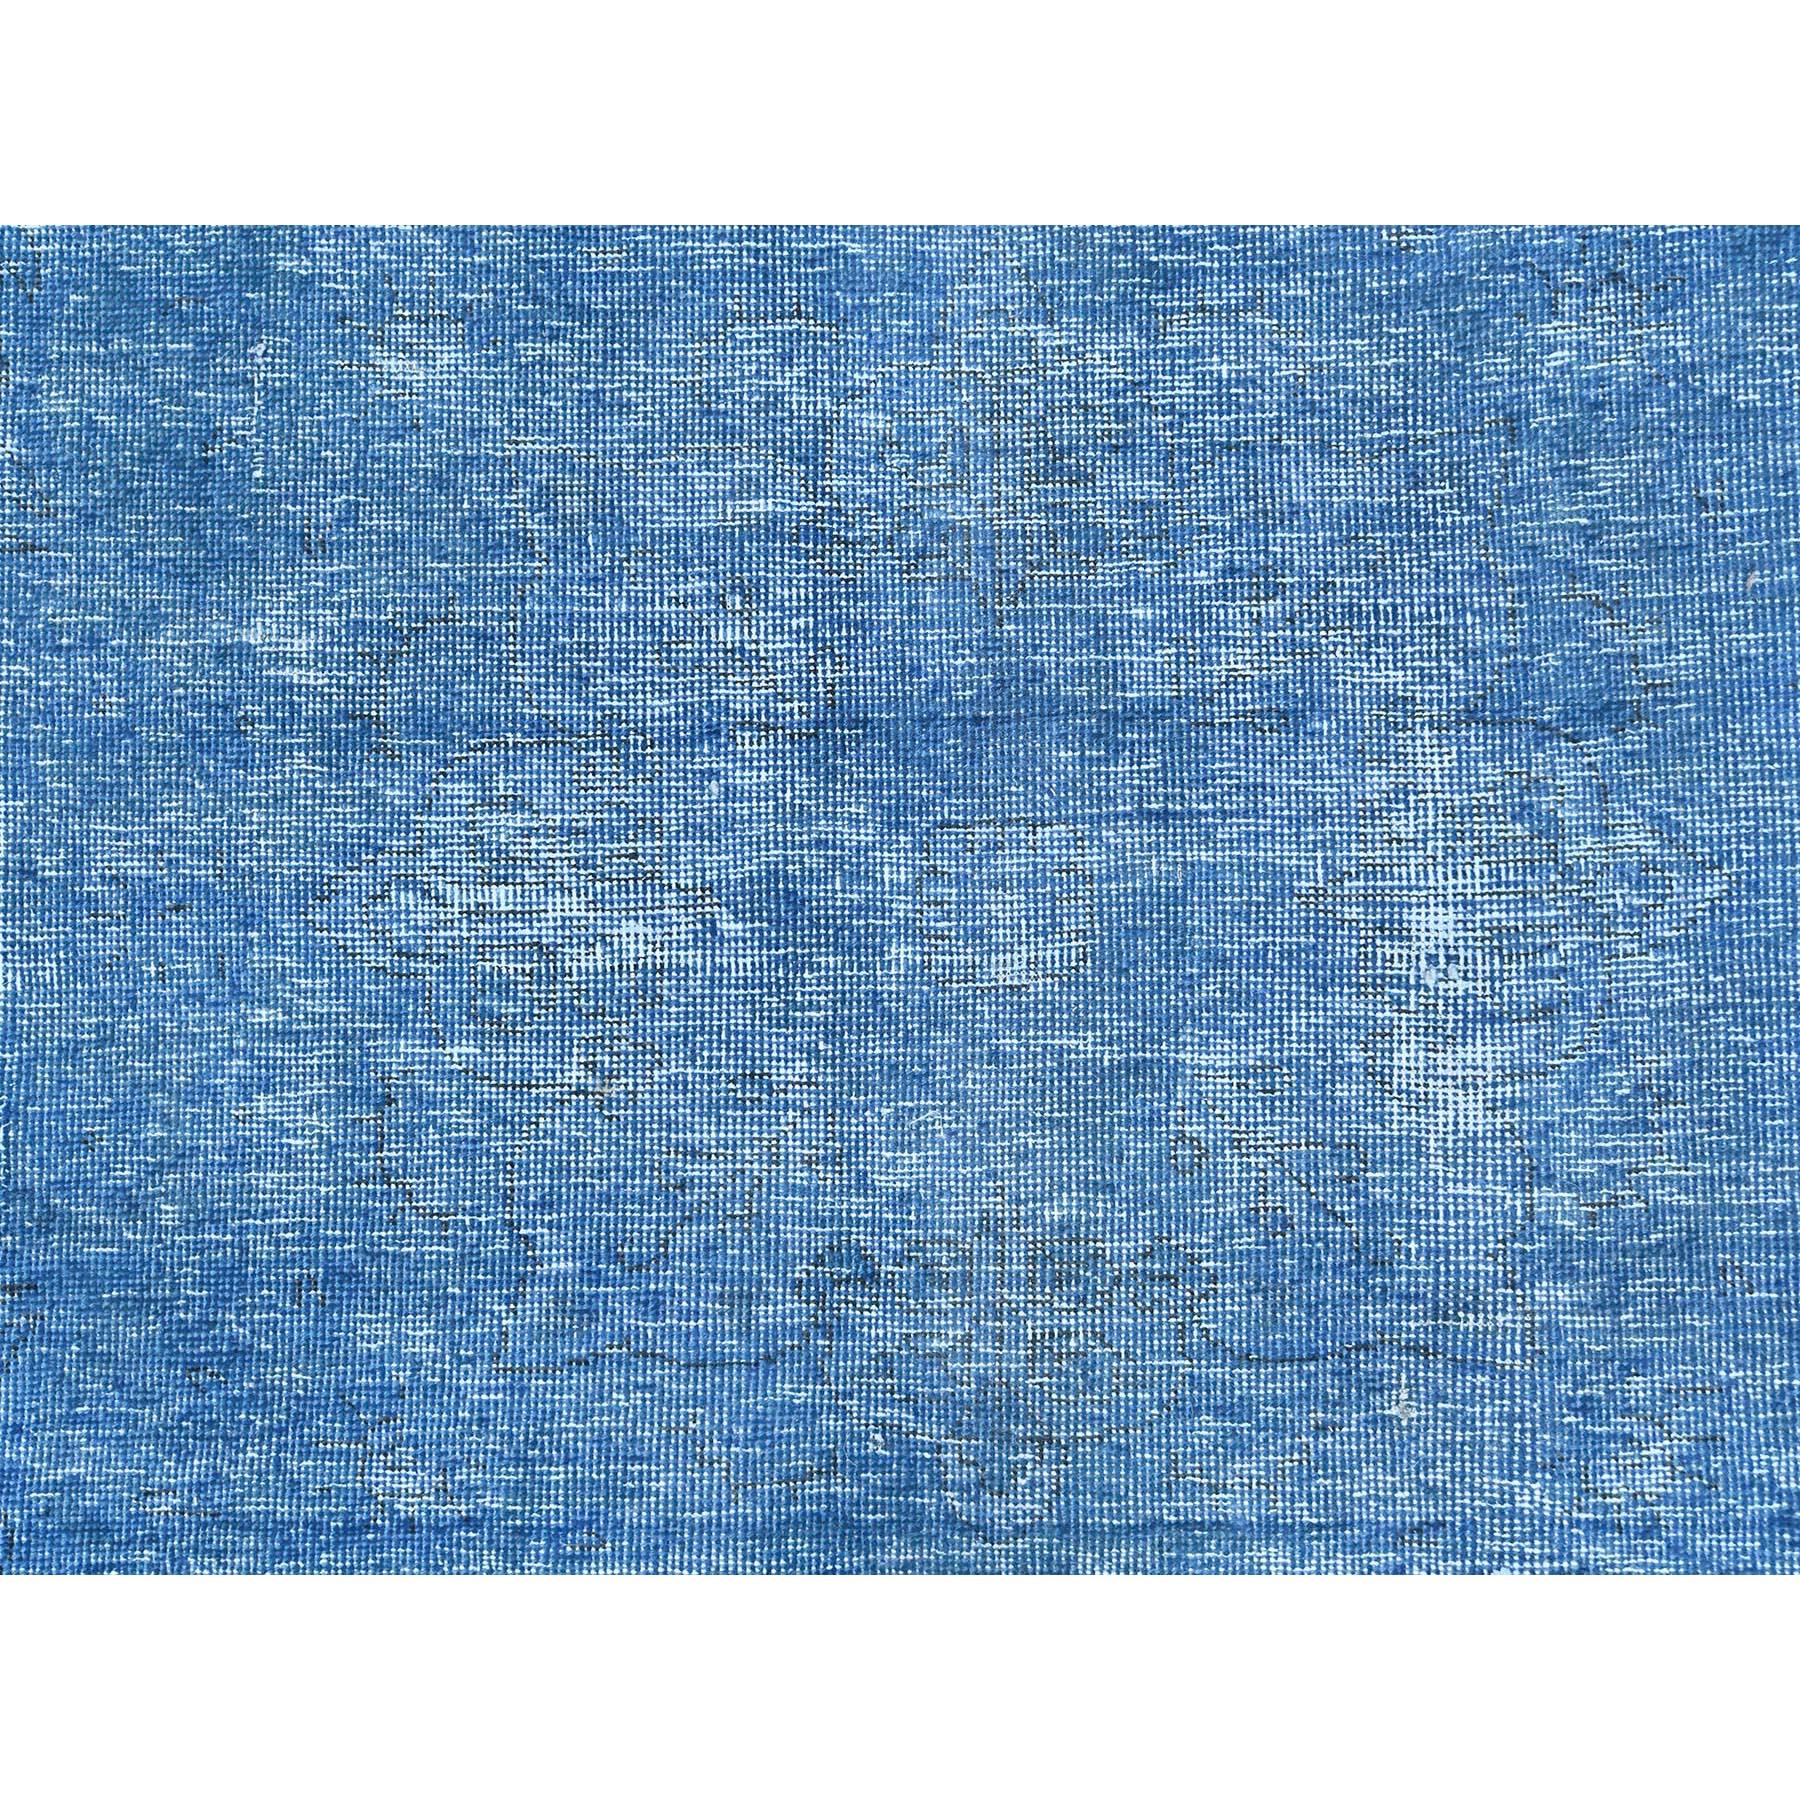 Denim Blue Old Persian Tabriz Worn Down Rustic Look Worn Wool Hand Knotted Rug For Sale 2